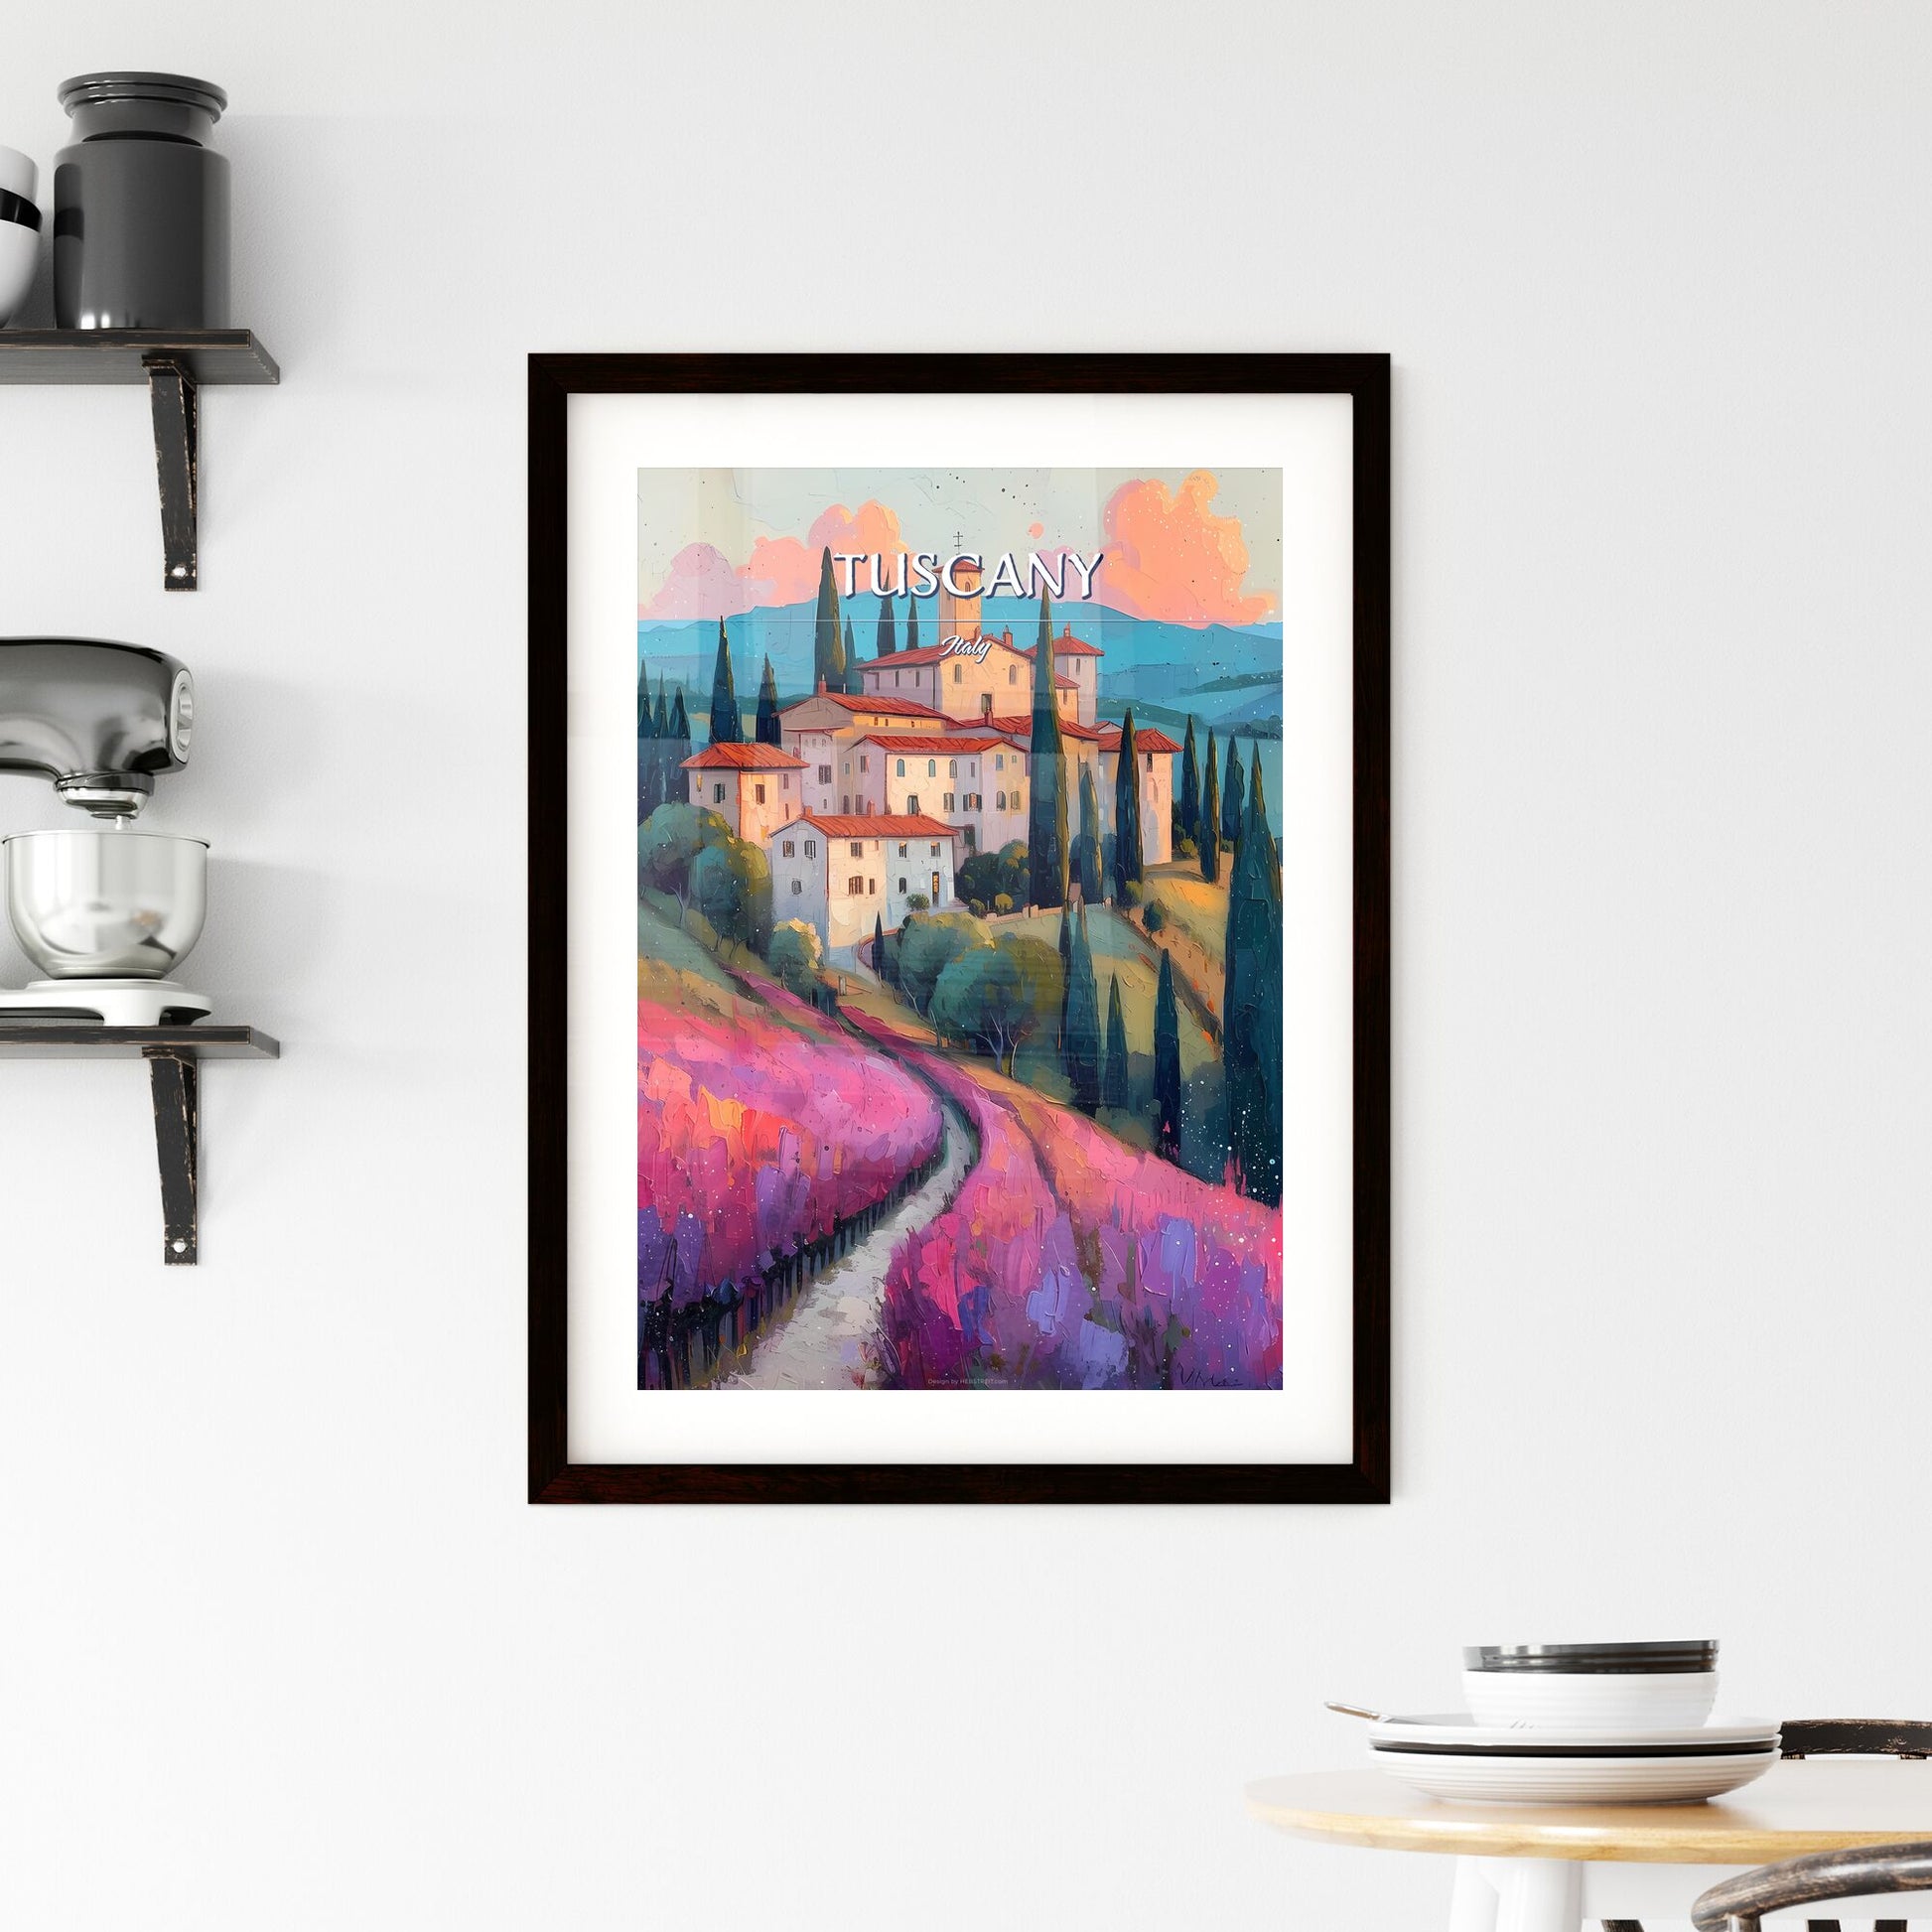 Tuscany, Italy - Art print of a painting of a house on a hill with trees and a road Default Title